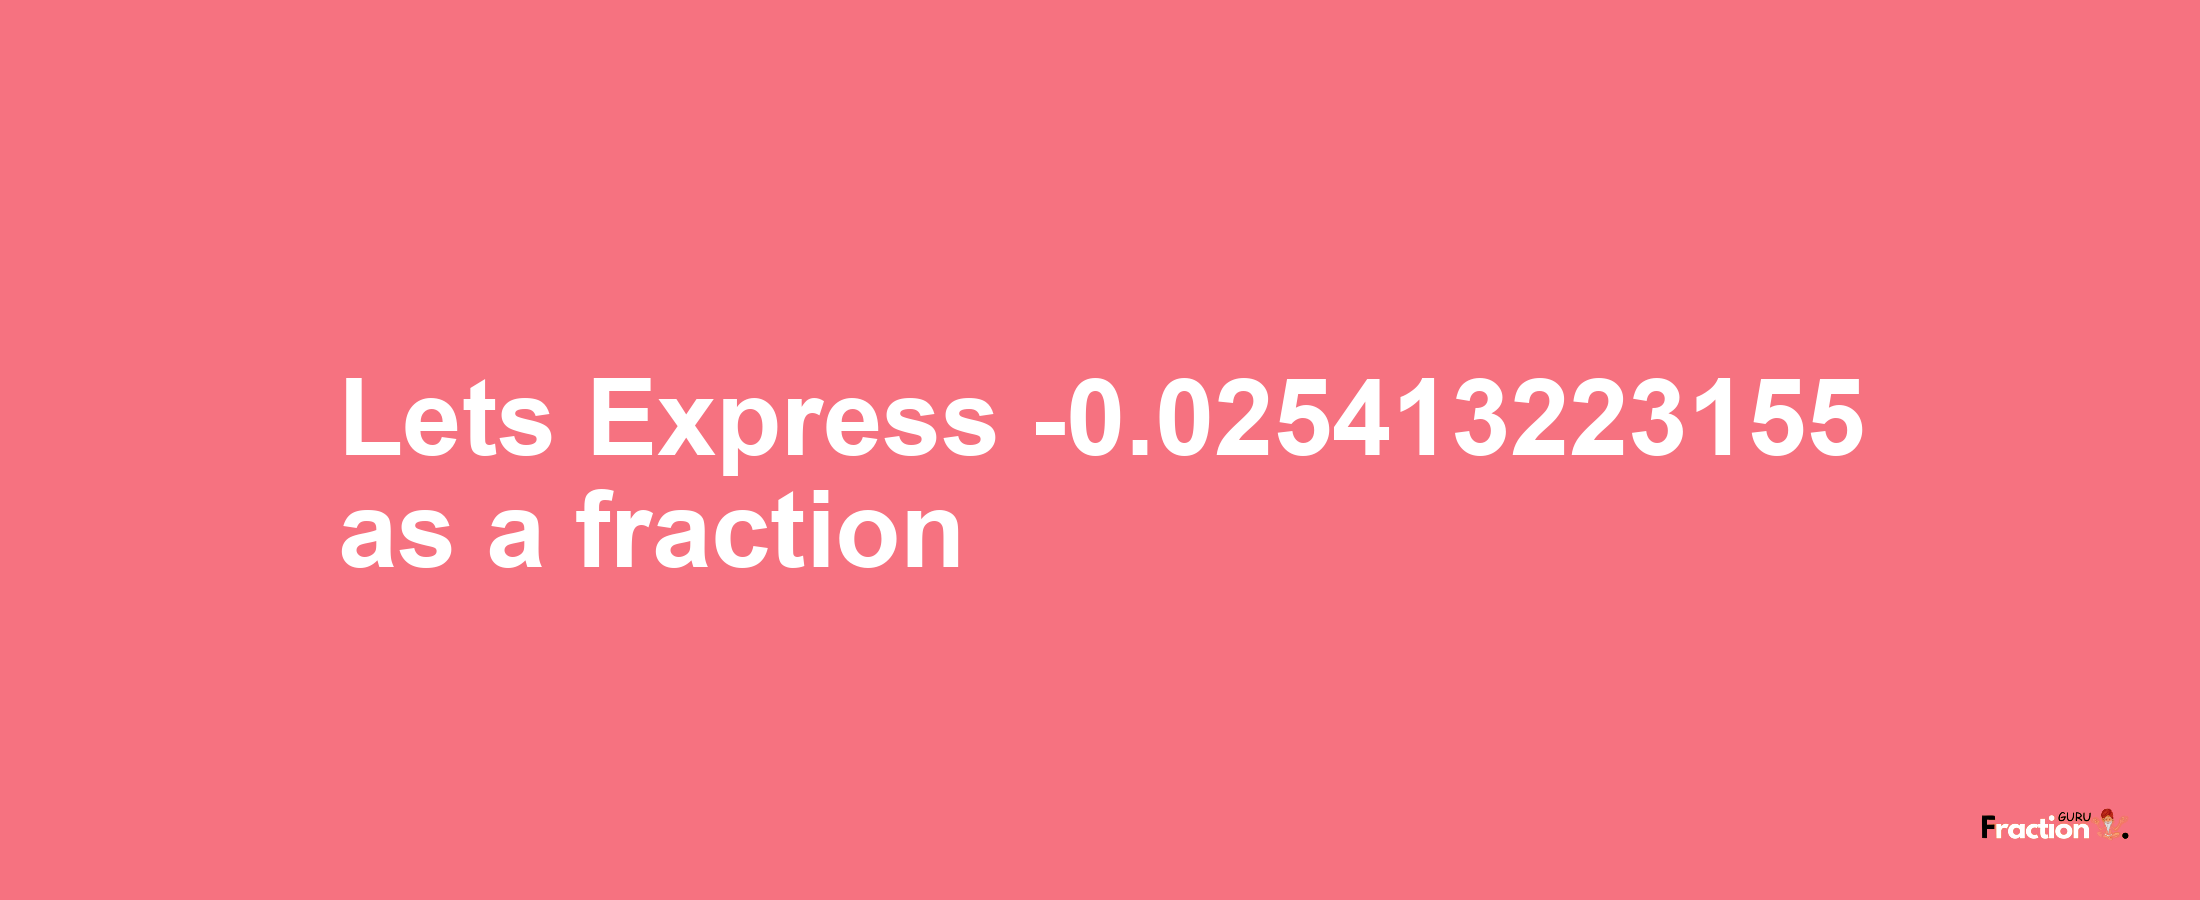 Lets Express -0.025413223155 as afraction